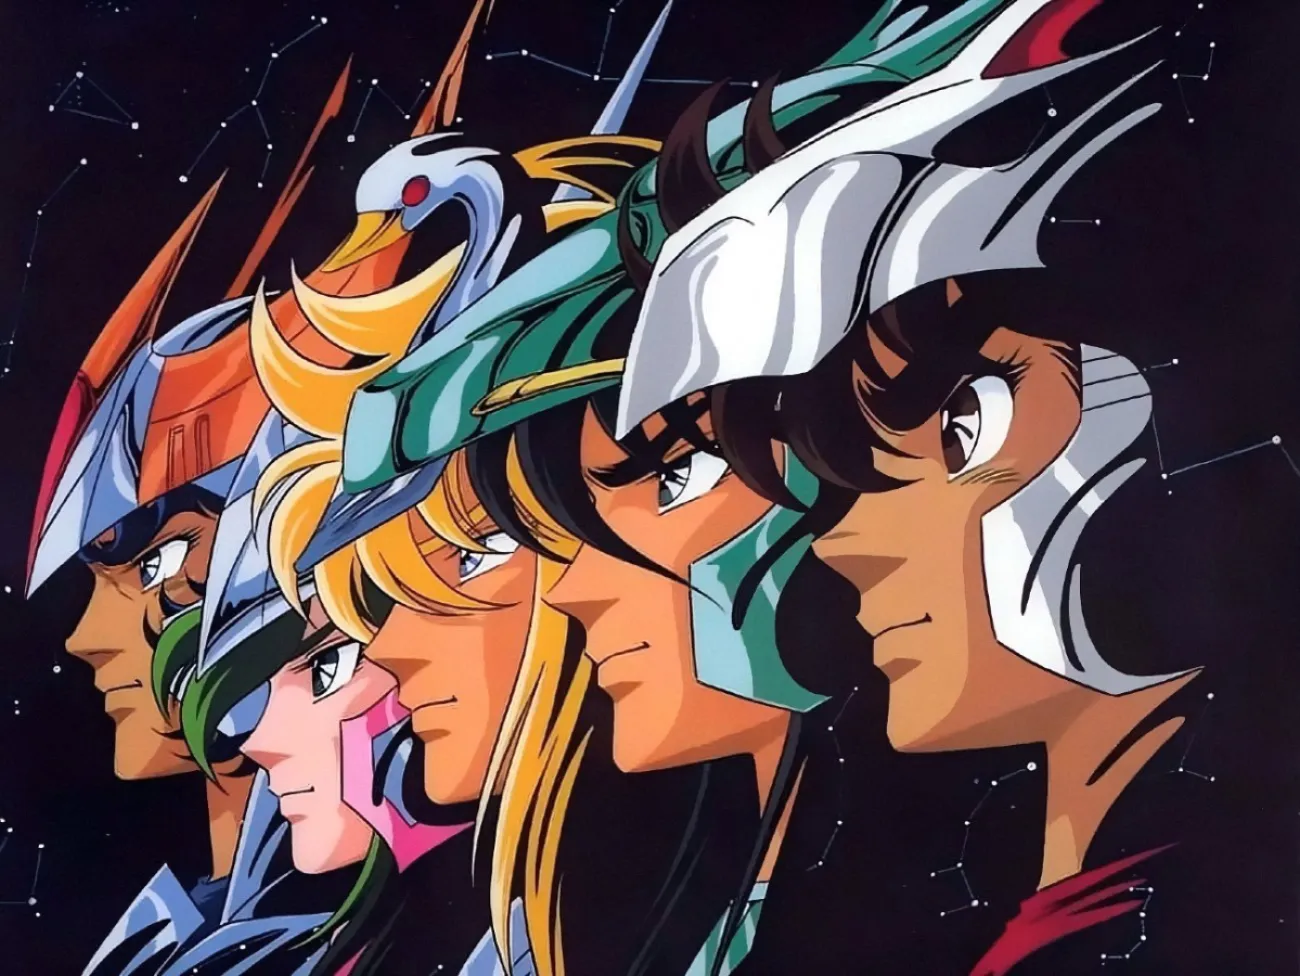 The cast of Saint Seiya looking into space